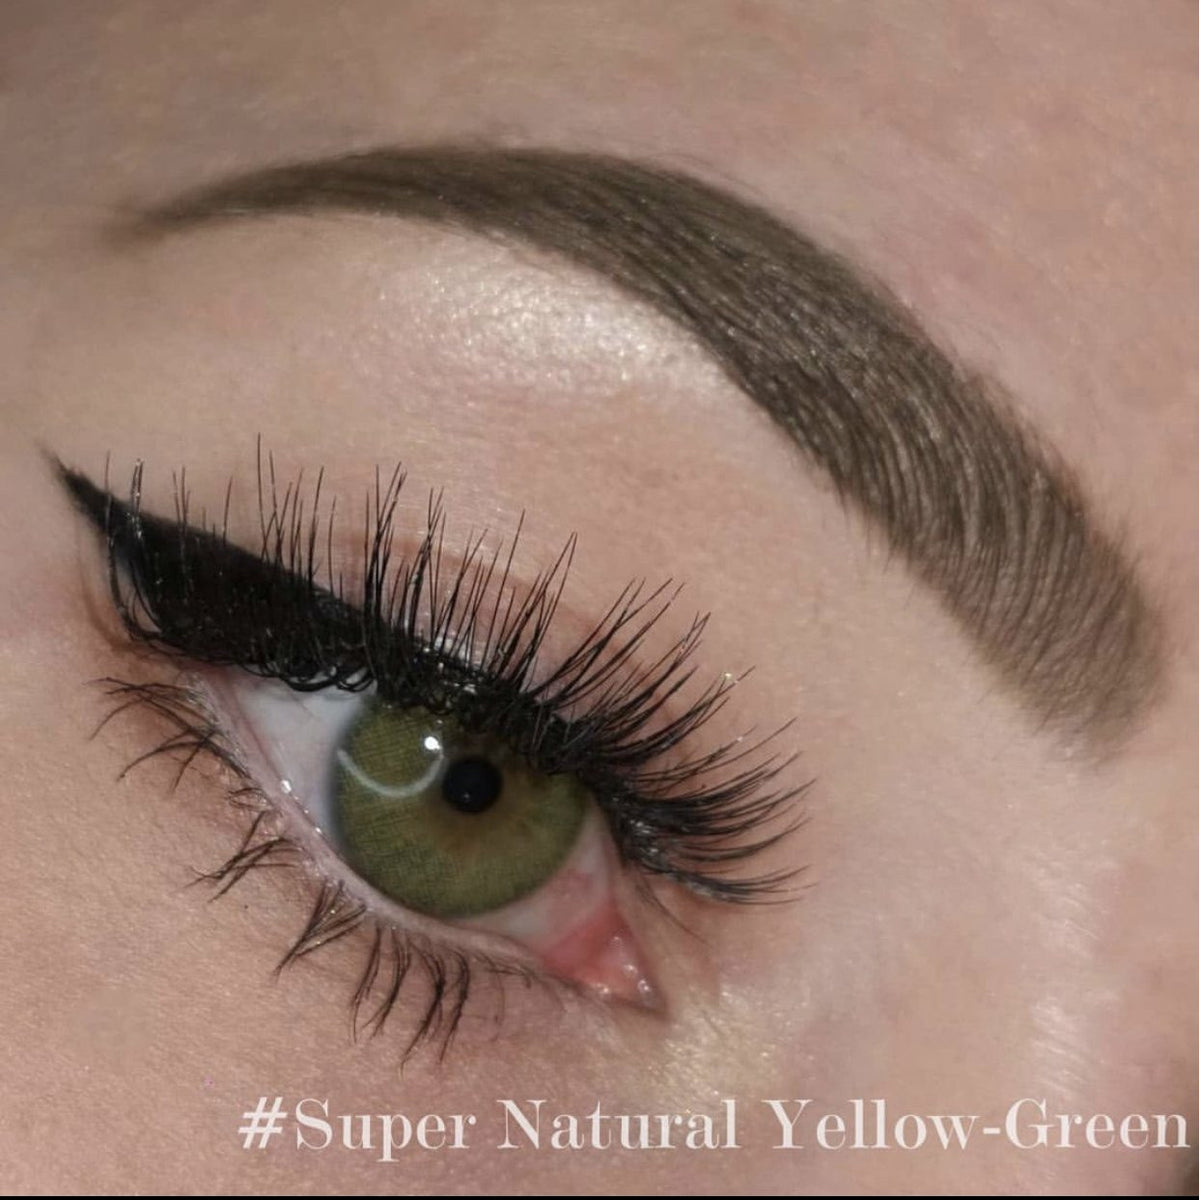 MB COSMETICS AMSTERDAM NATURAL GREEN YELLOW COLORED CONTACT LENSES